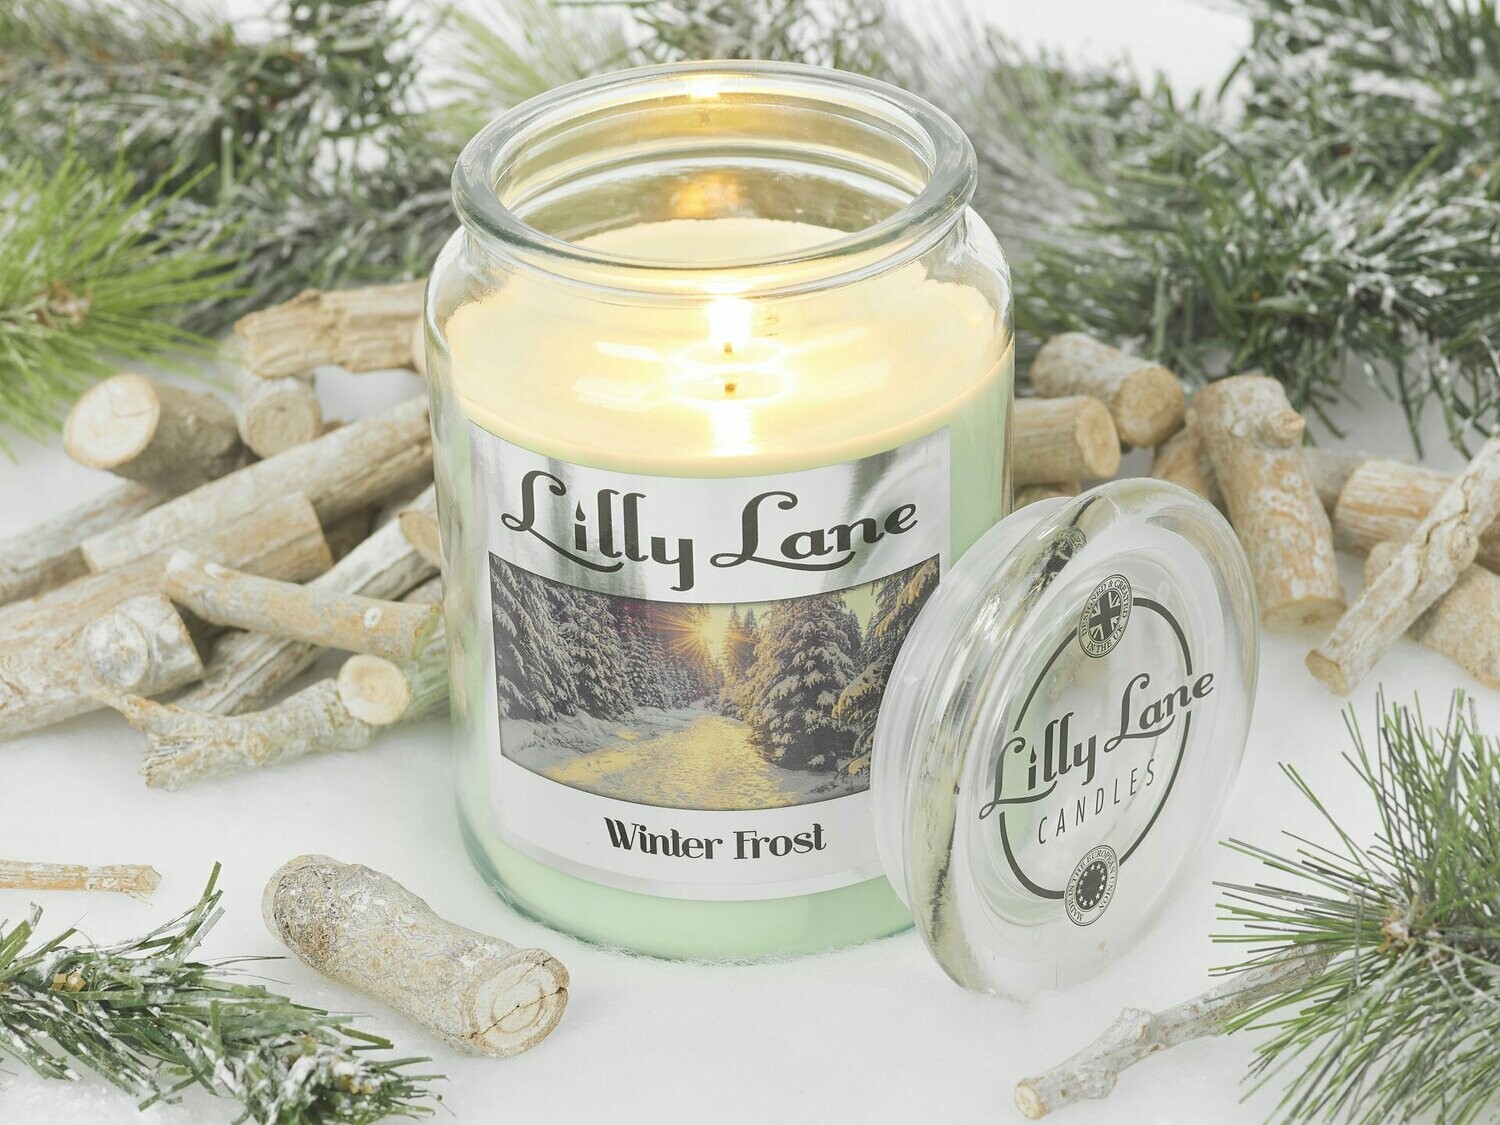 Lilly Lane 18oz Large Scented Candles In Glass Jar Fragrance Aromatic Home Gift 